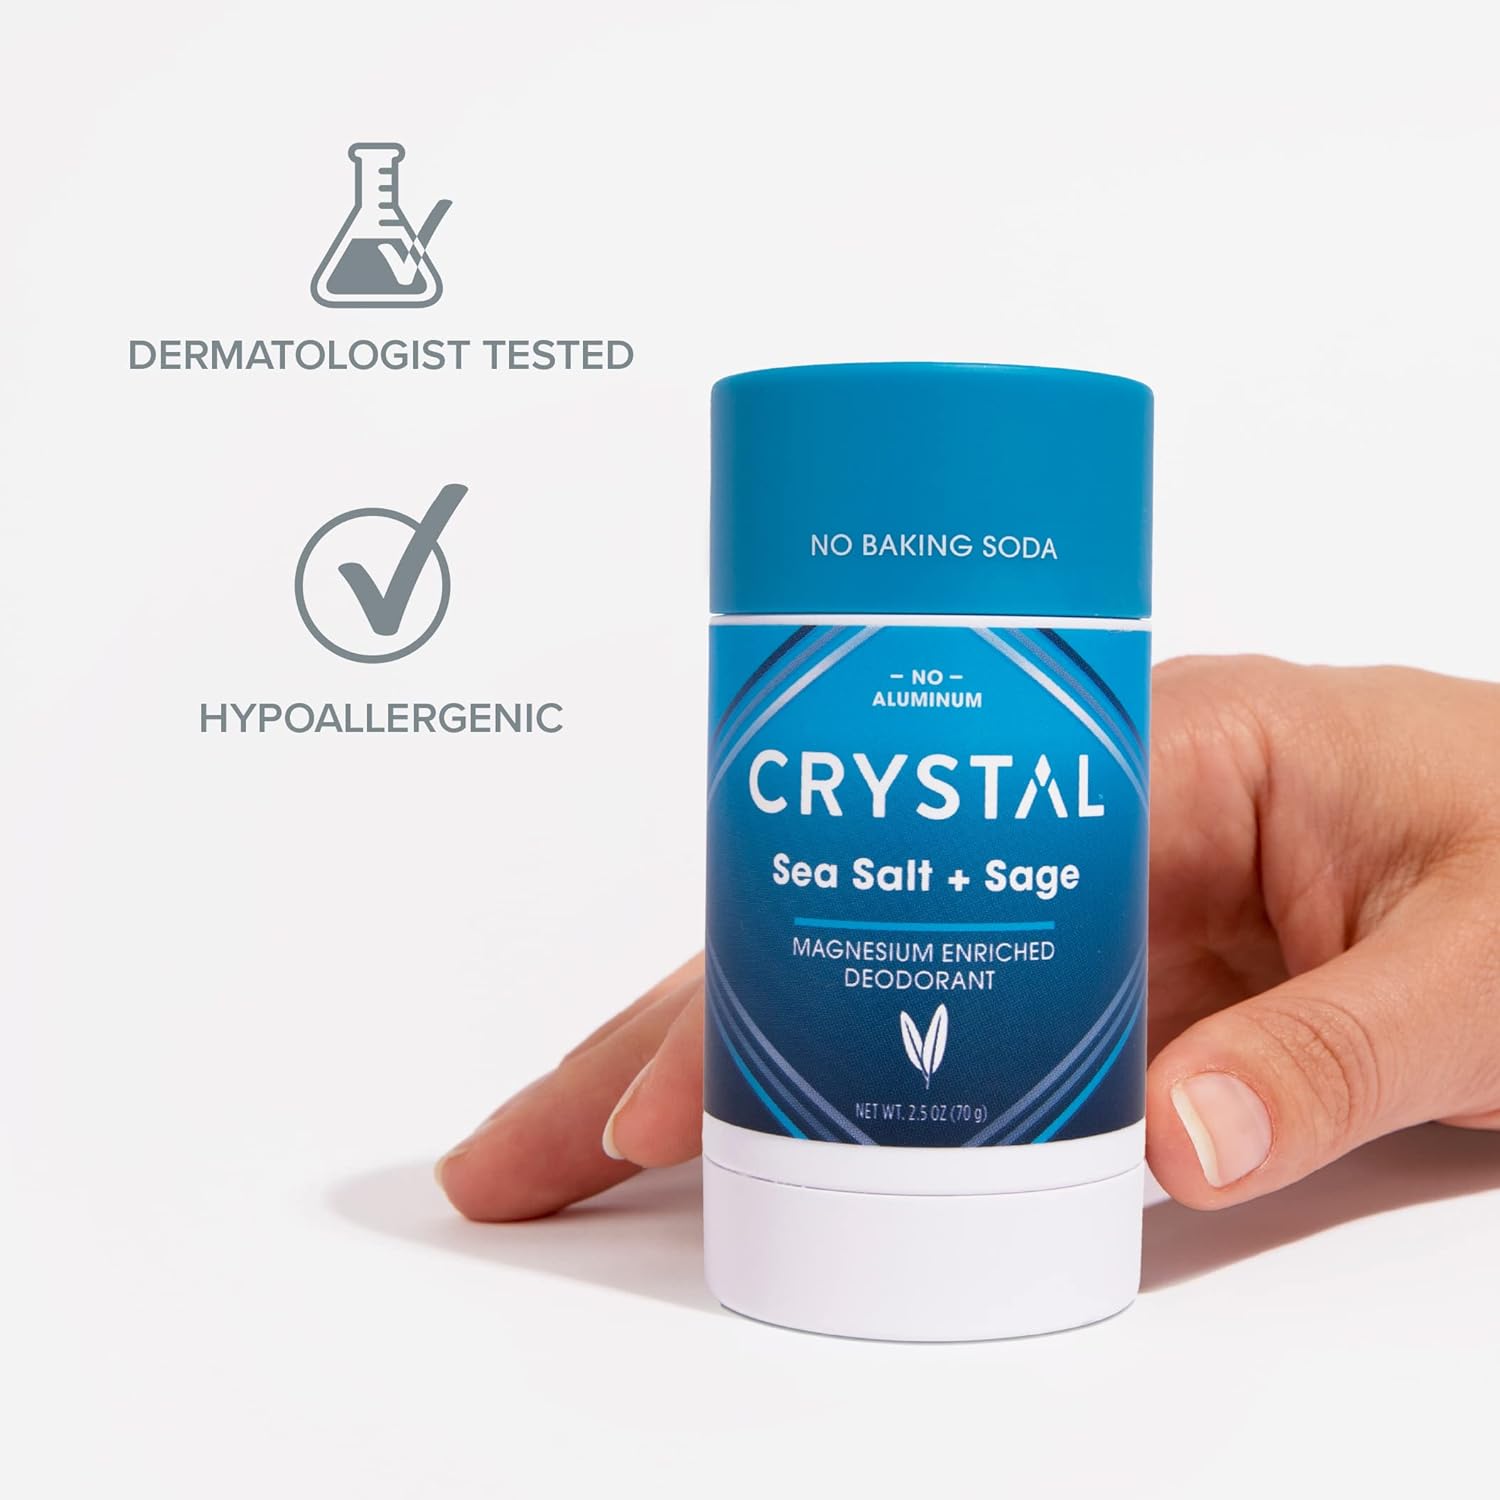 Crystal Magnesium Solid Stick Natural Deodorant, Non-Irritating Aluminum Free Deodorant for Men or Women, Safely and Effectively Fights Odor, Baking Soda Free, Sea Salt + Sage, 2.5 oz : Beauty & Personal Care